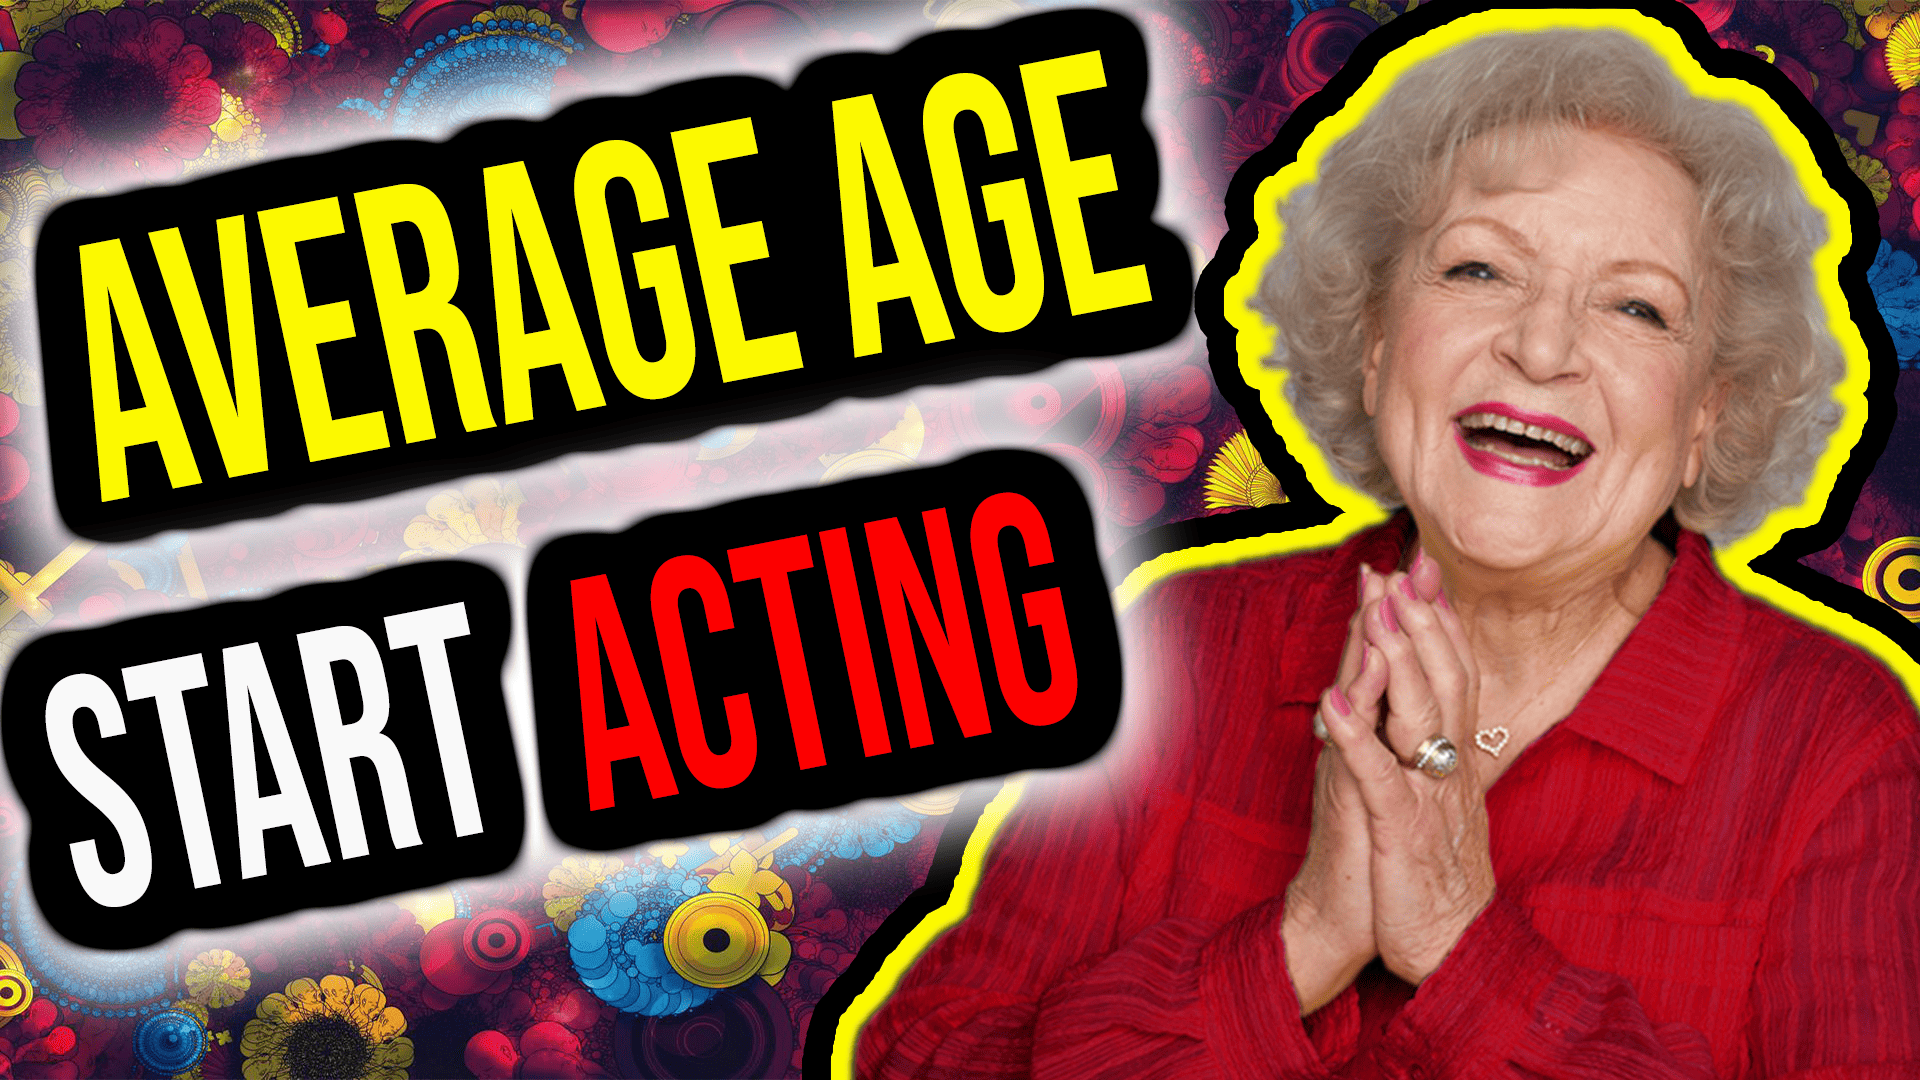 What Is The Average Age Actors Start Acting? An In-Depth Look At When To Pursue Your Dreams